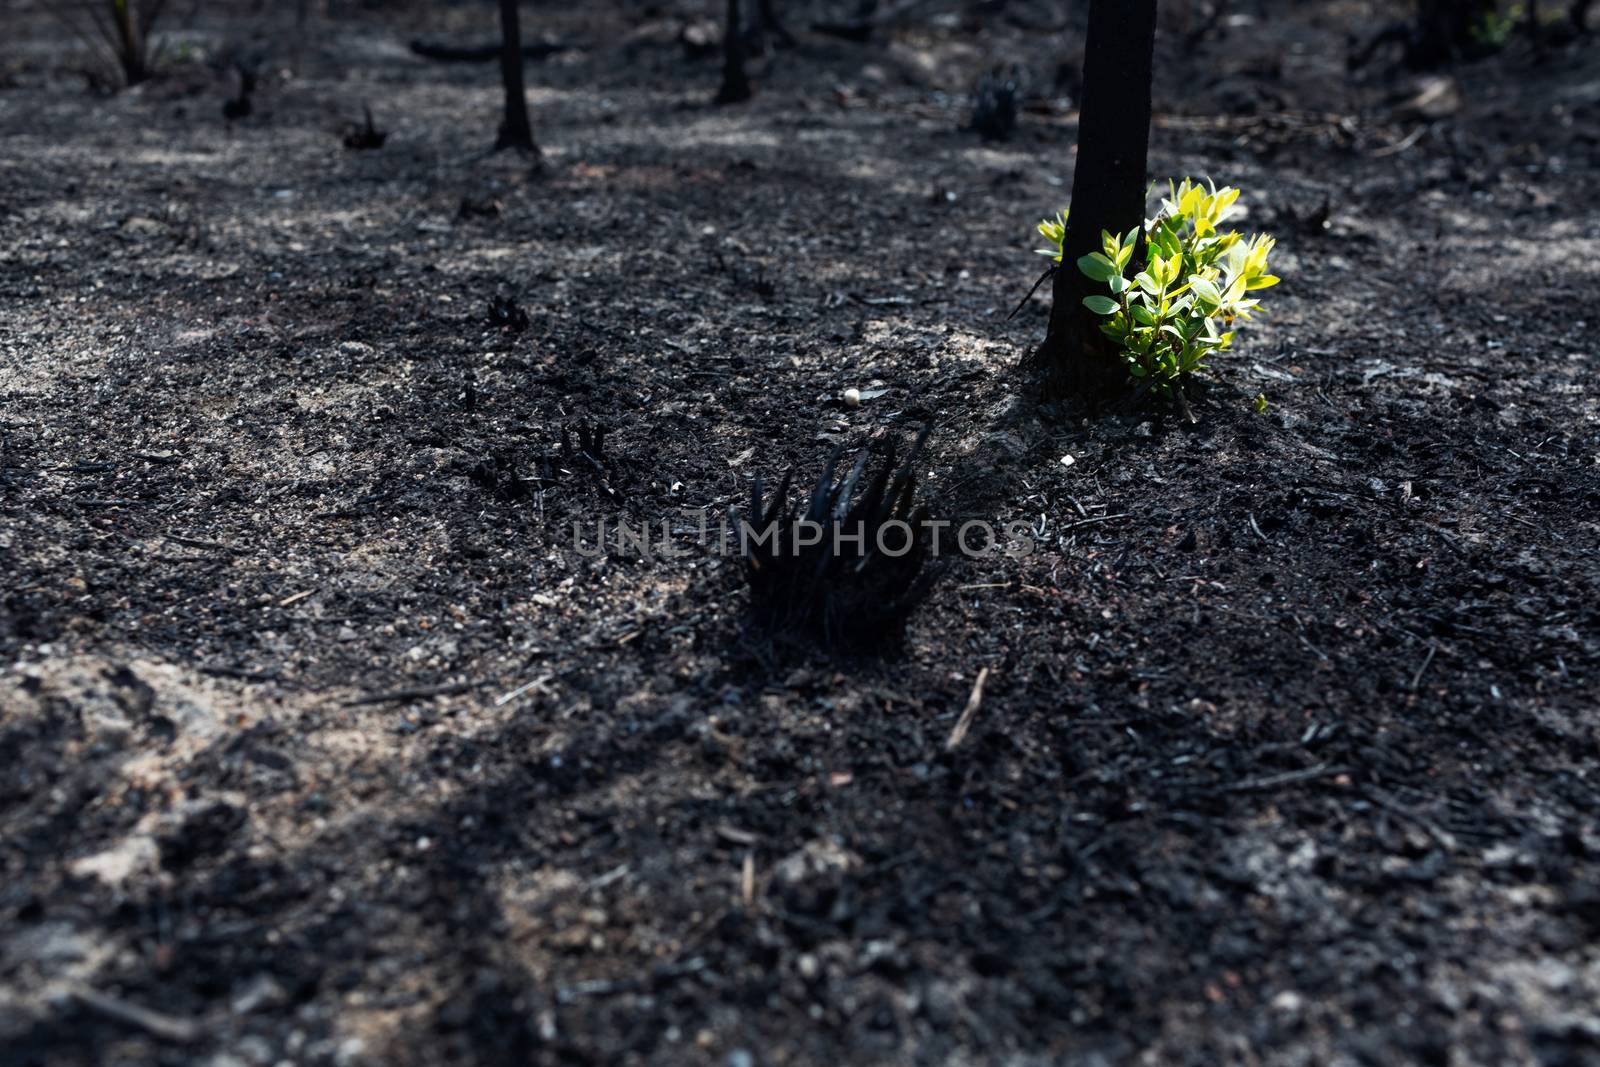 New leaves burst forth from a burnt tree after forest fire.The rebirth of nature after the fire.Ecology concept
background.